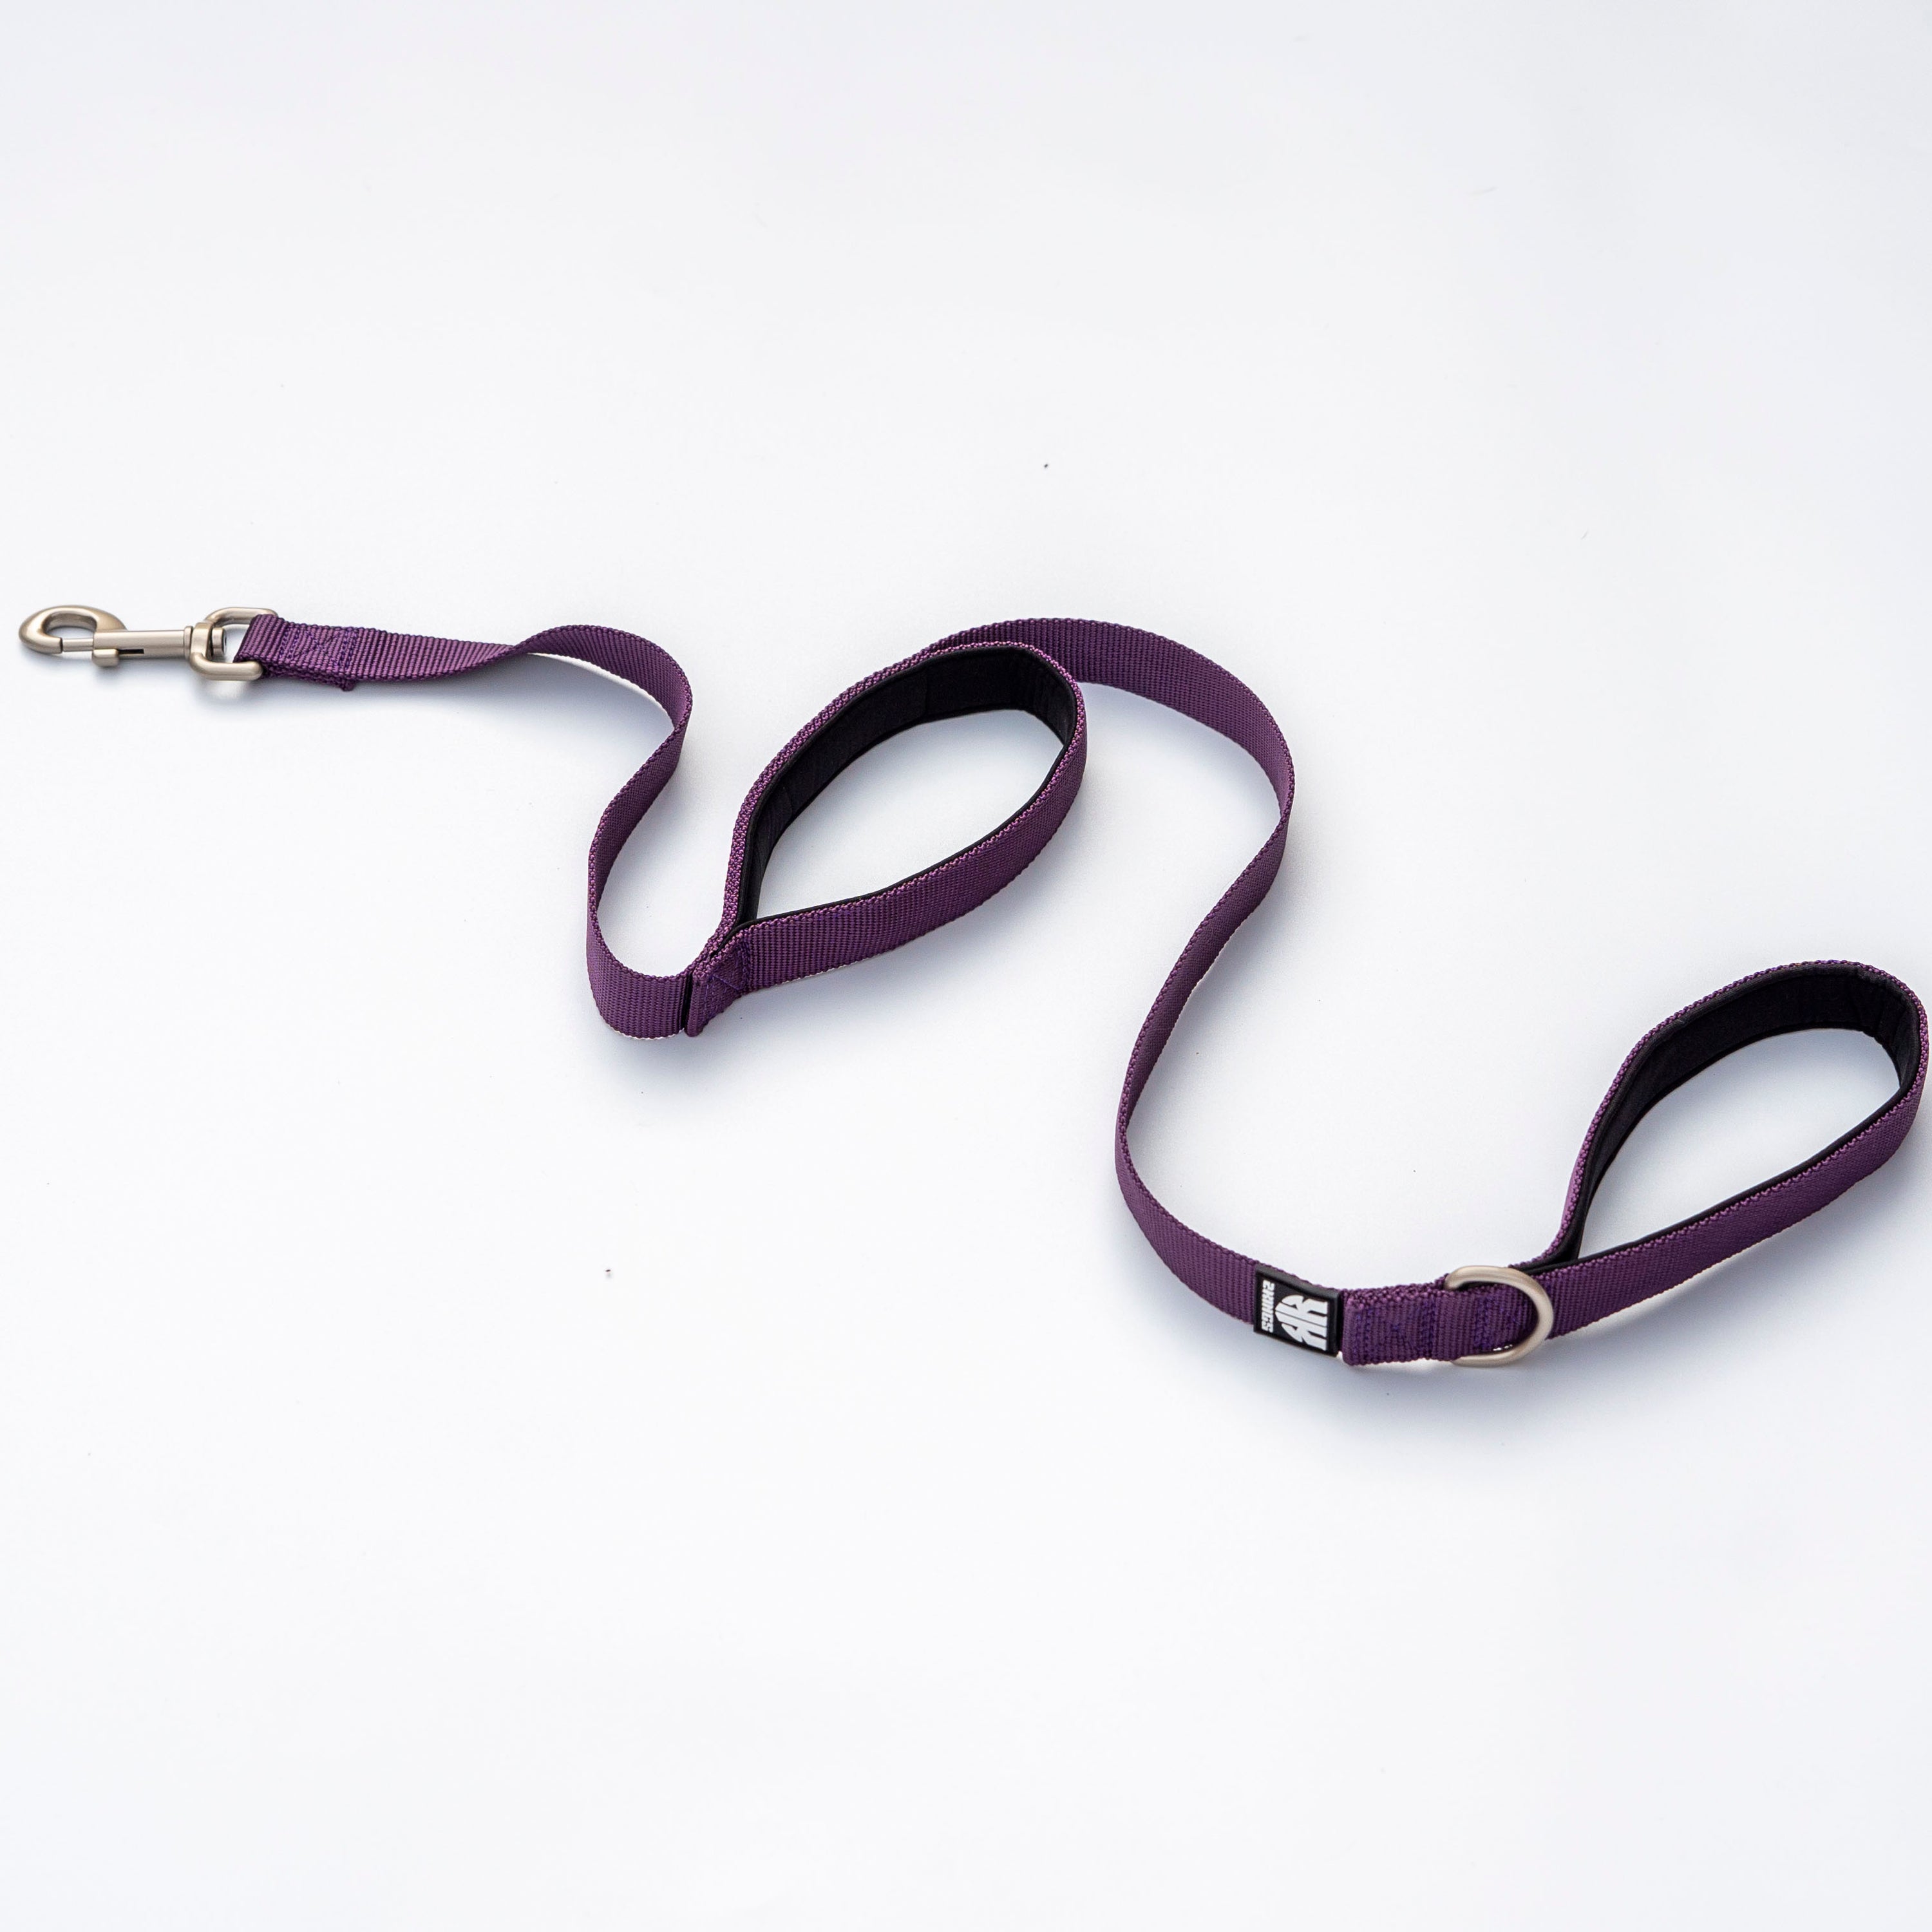 Adjustable Dog Harness with Double-Handed Lead Set - Lightweight & Reflective - Purple.